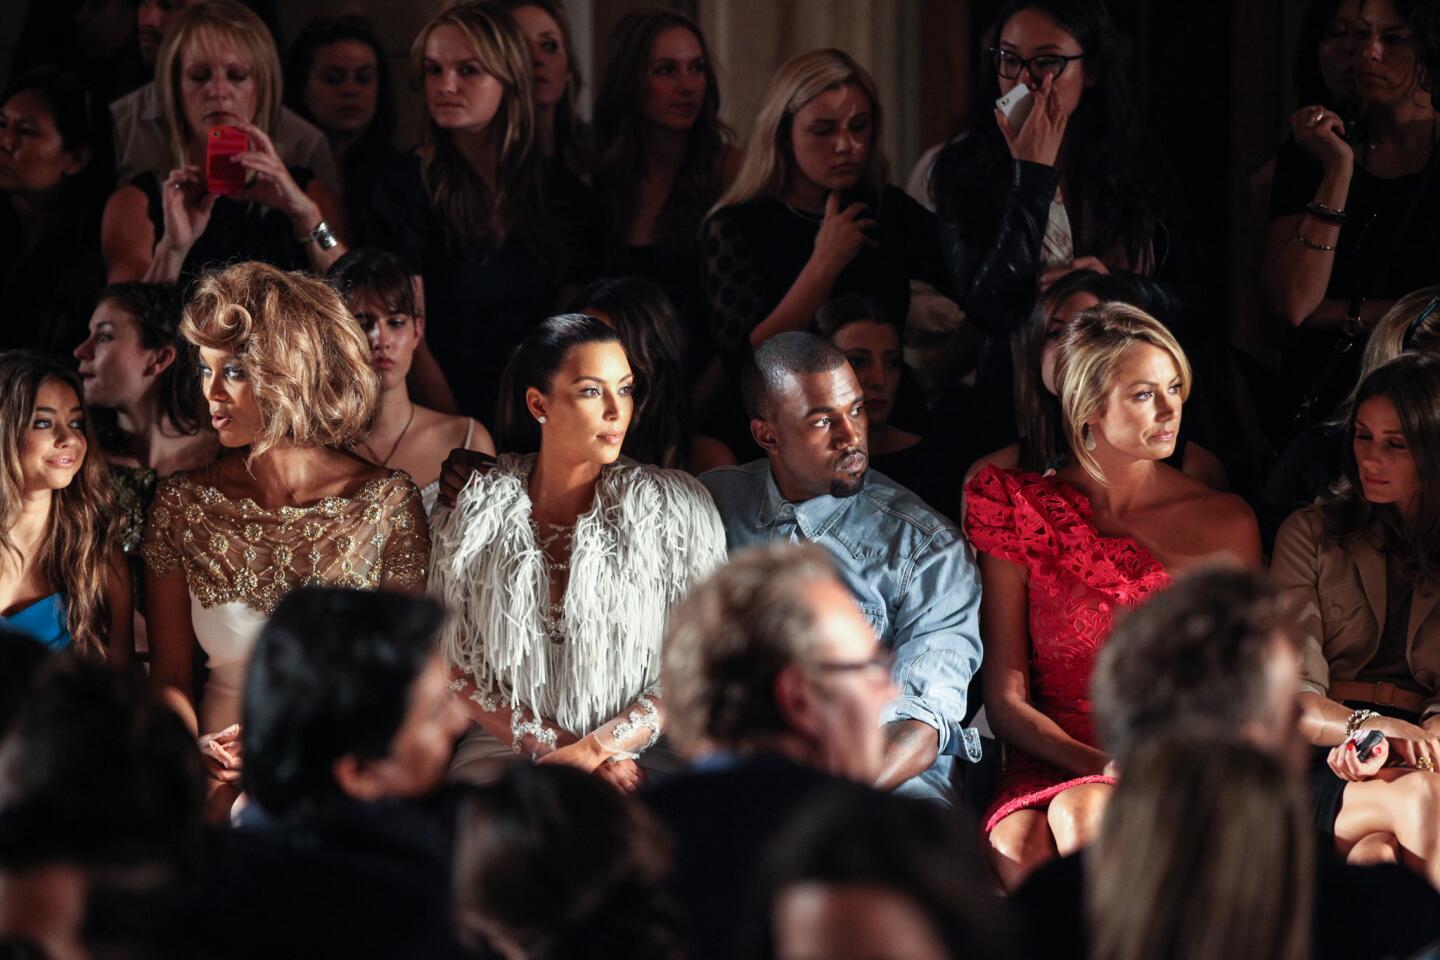 Actress Sarah Hyland, left, model Tyra Banks, television personality Kim Kardashian, rapper Kanye West, actress Stacy Keibler and television personality Olivia Palermo attend the Marchesa show during New York Fashion Week on Sept. 12, 2012.